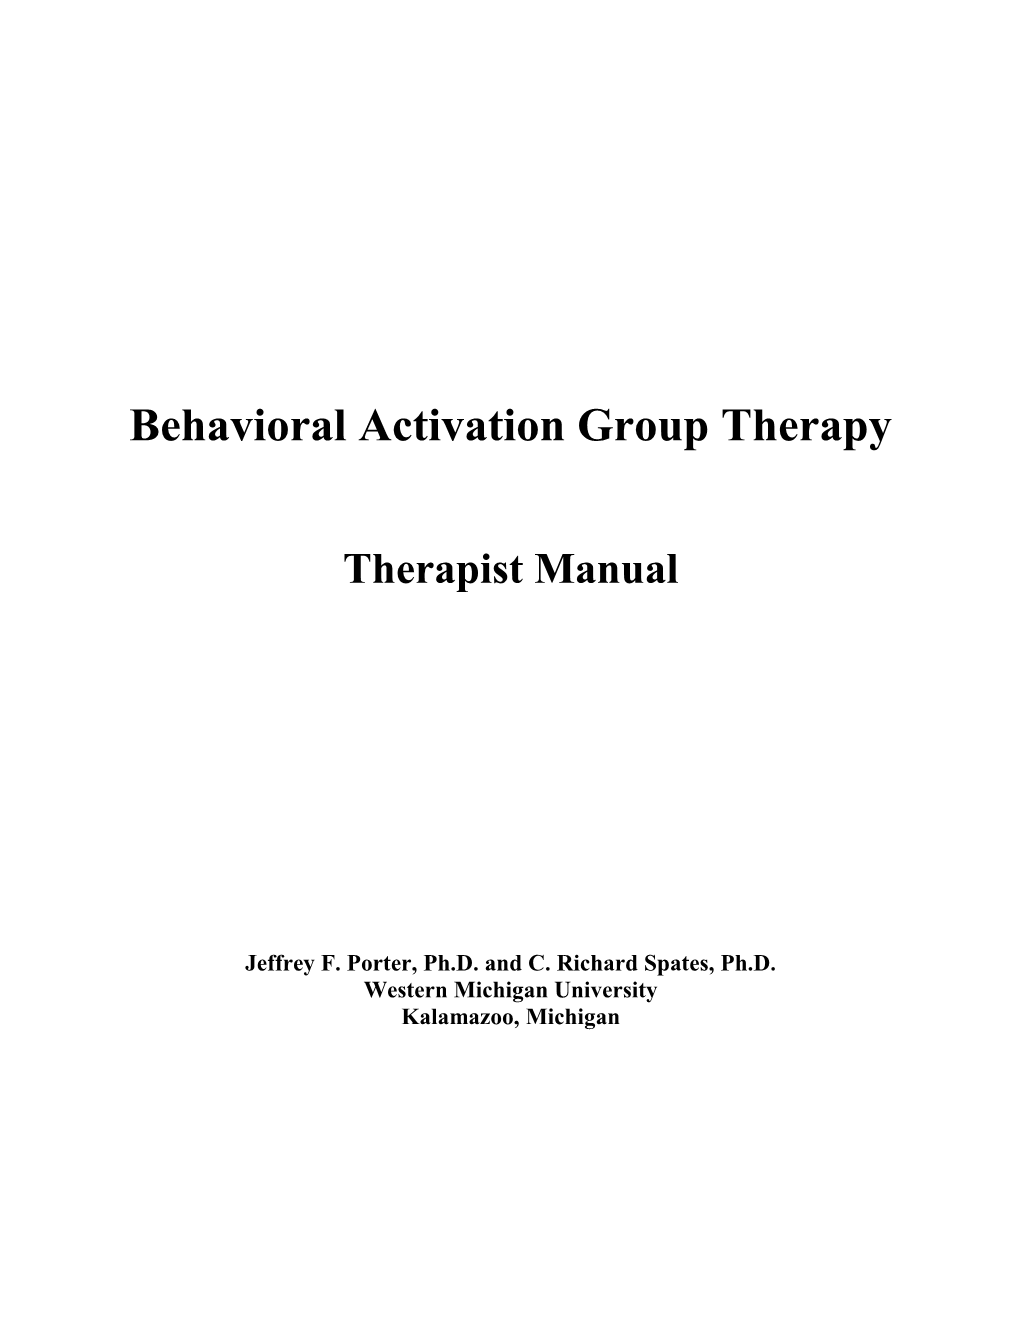 Behavioral Activation Group Therapy